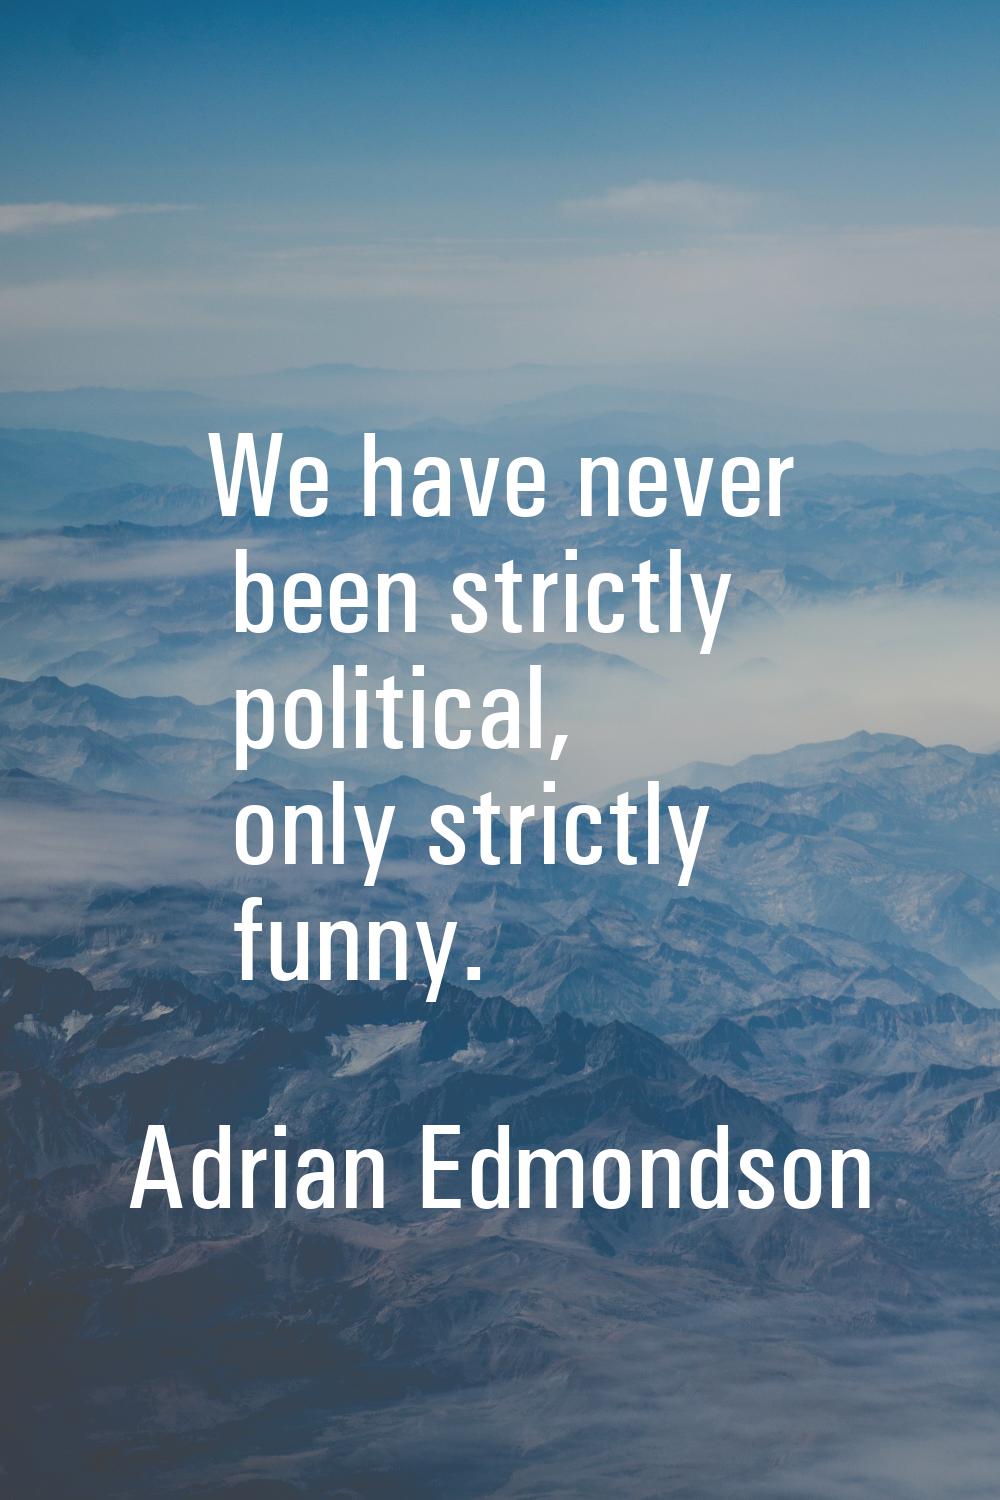 We have never been strictly political, only strictly funny.